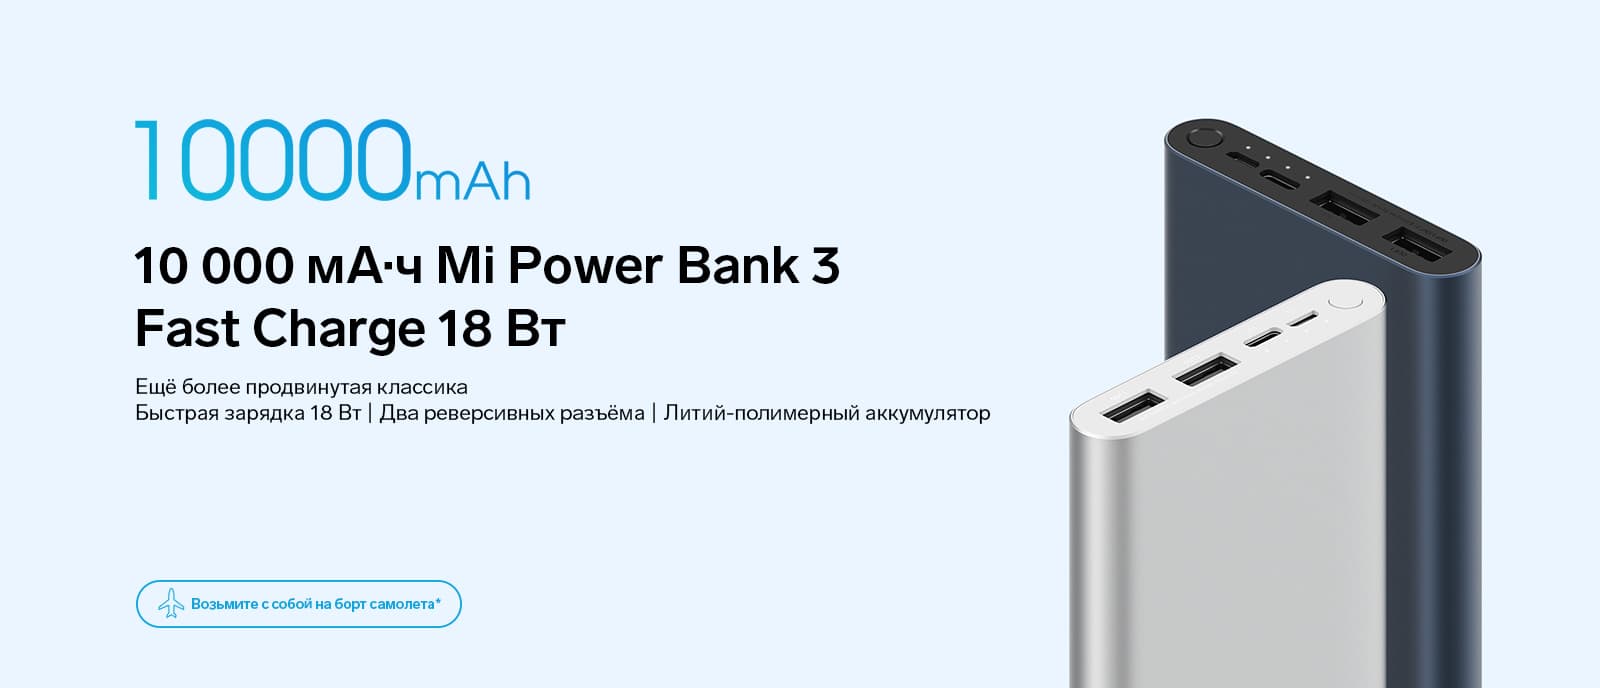 Power Bank 3 Fast Charge